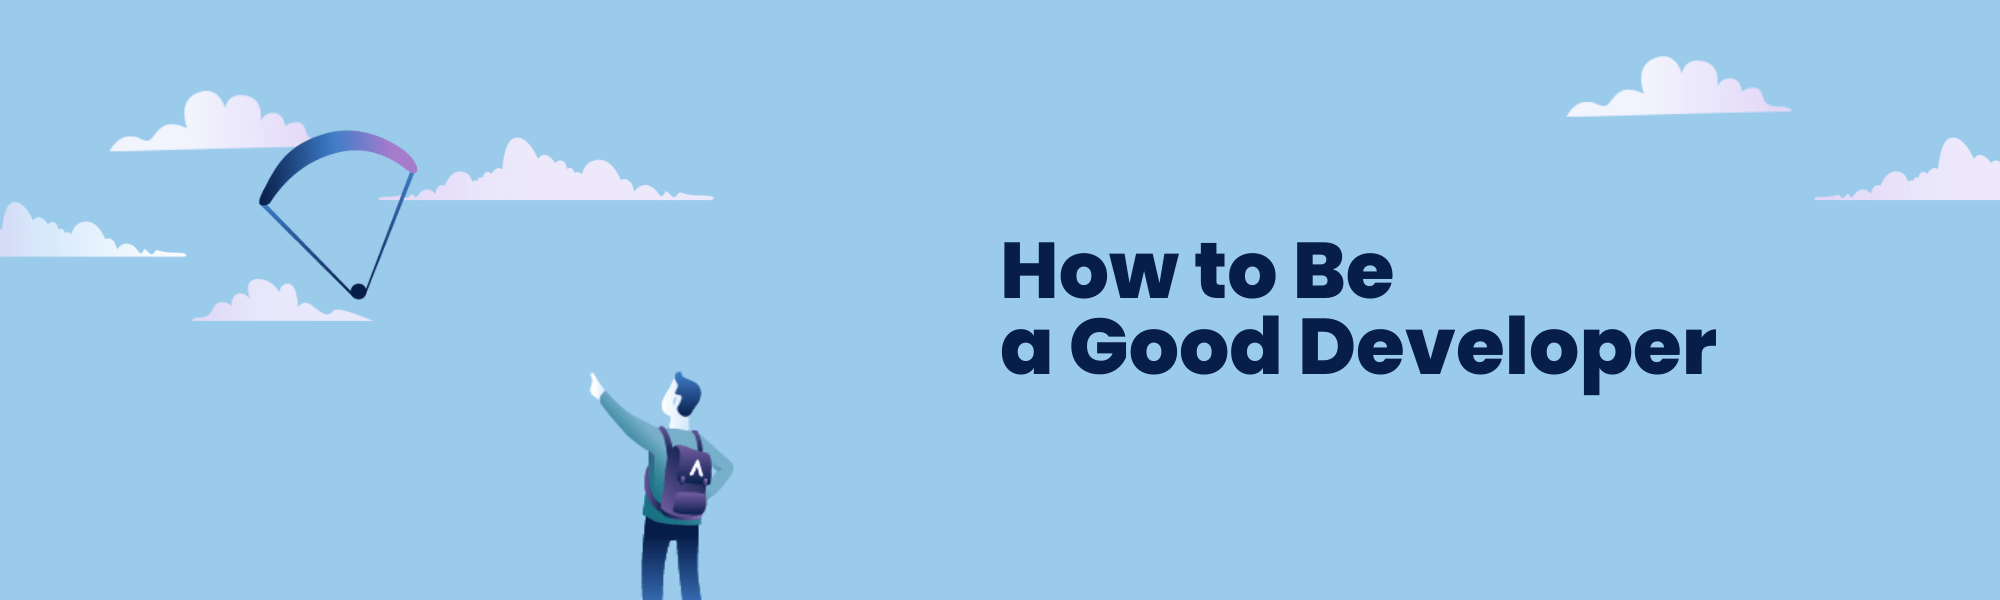 How to Be a Good Developer: 20 Practical Tips From Our Senior Programmers - Stratoflow